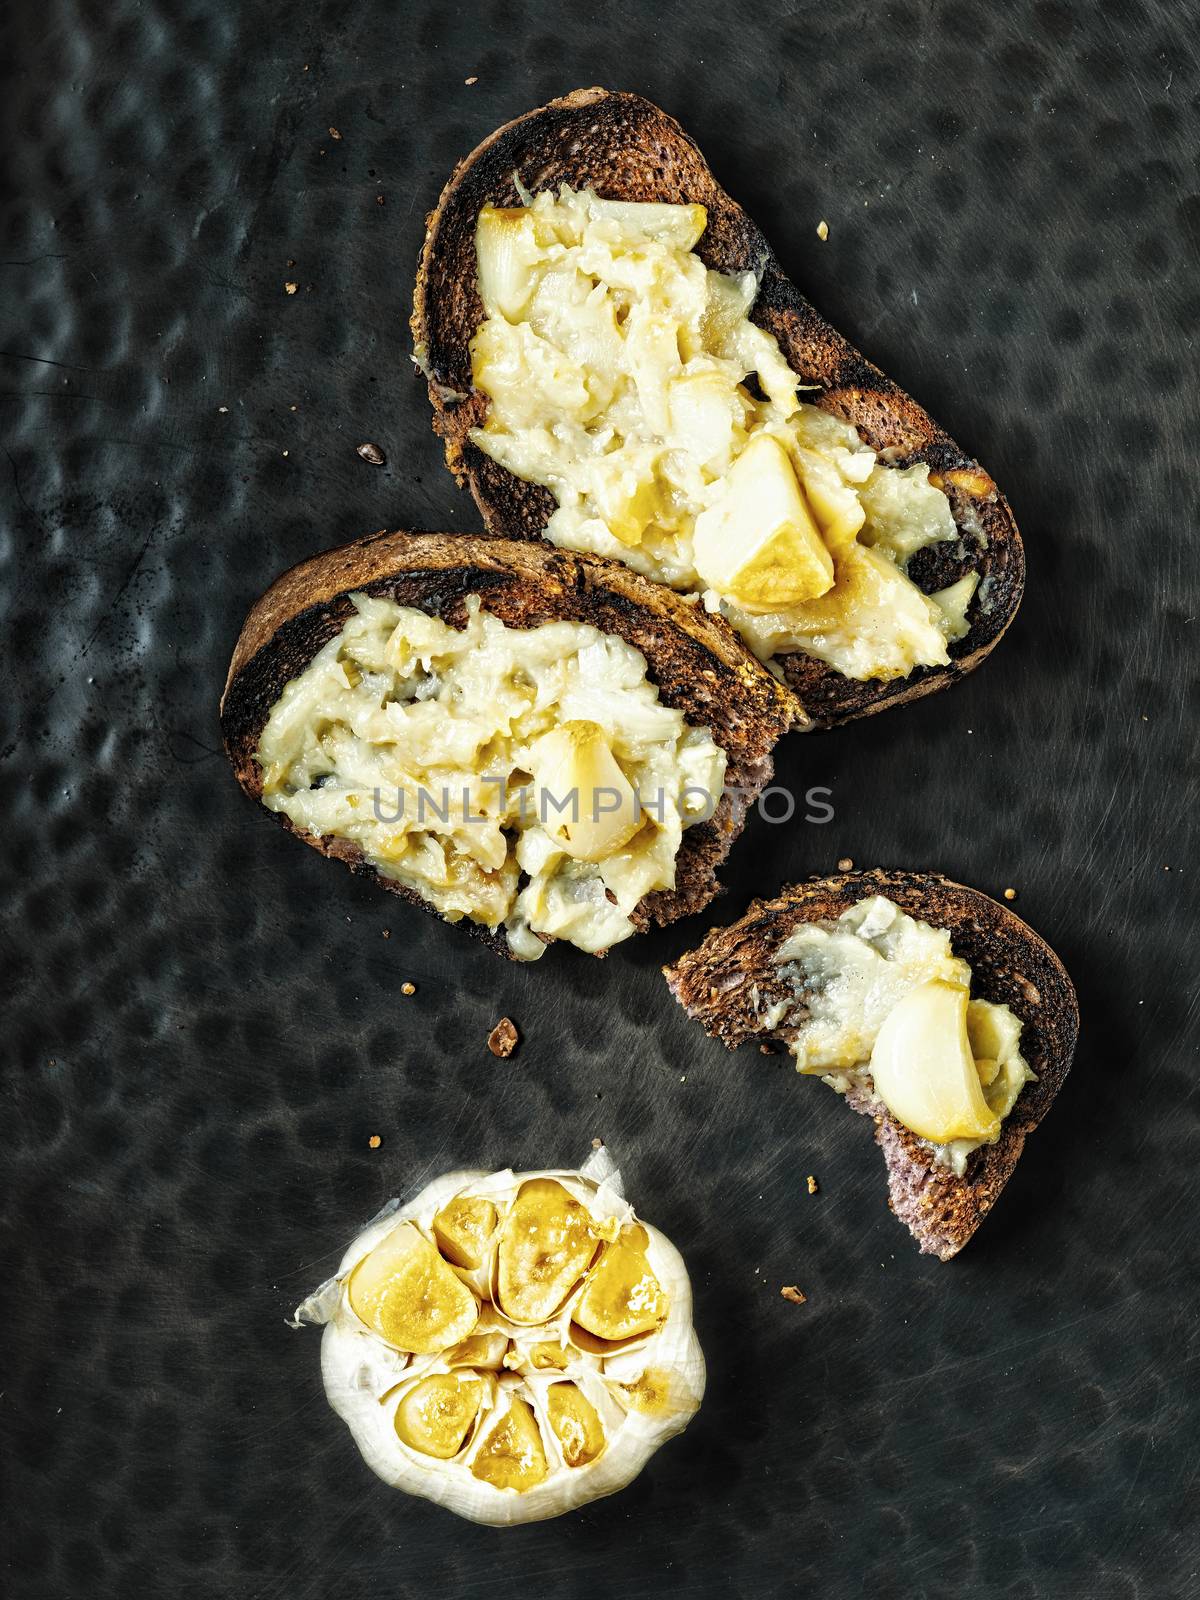 rustic aromatic garlic jam toast by zkruger